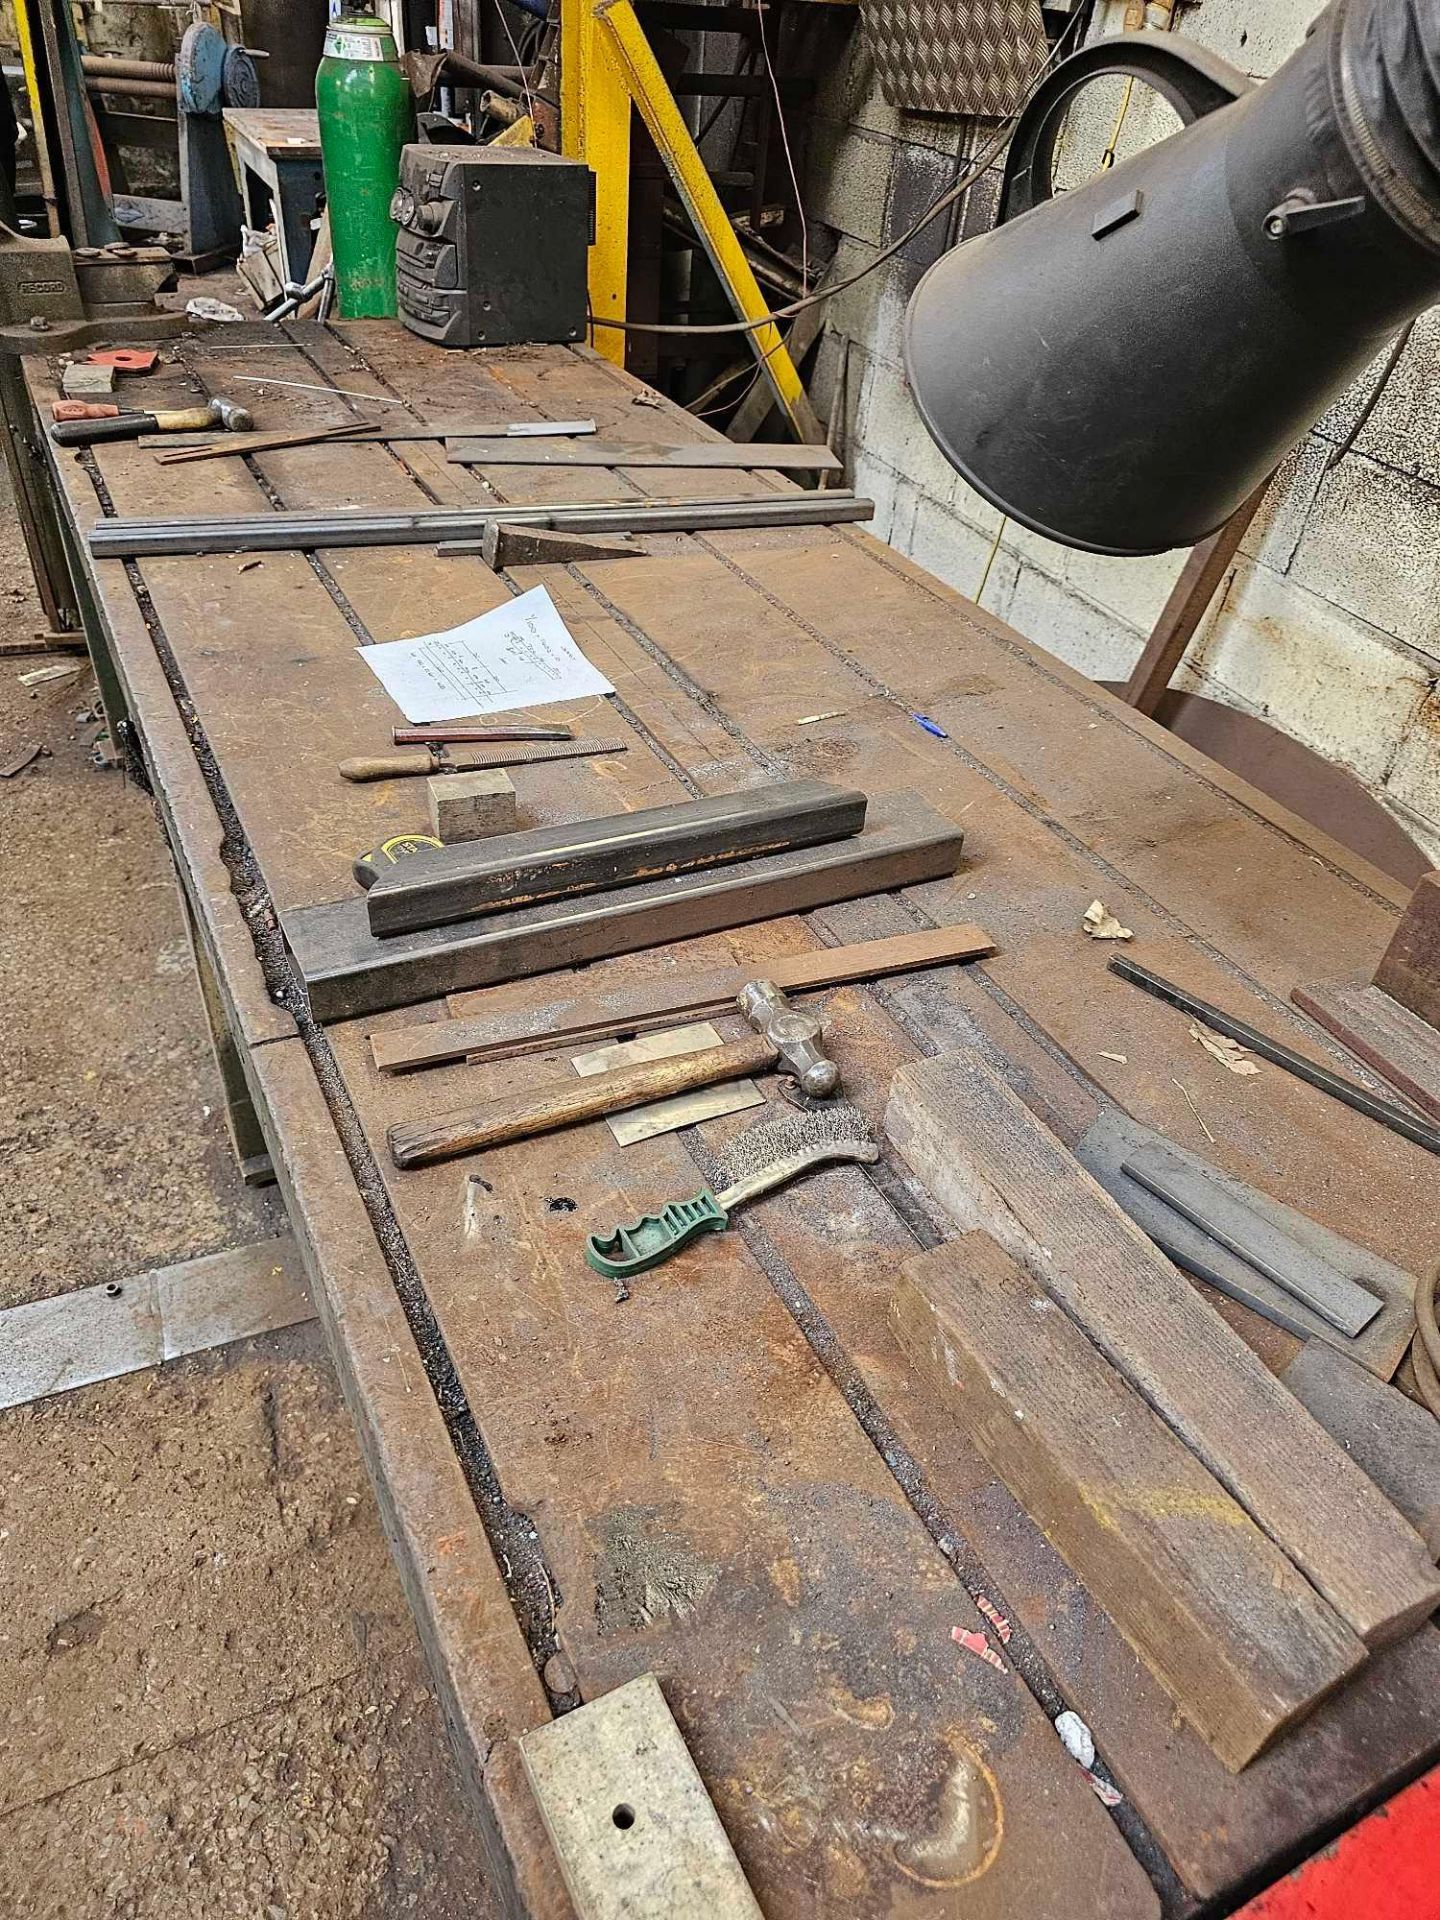 Cast Steel Engineers Marking Out Work Bench 305 x 110 x 89cm Weight 1600kg - Image 3 of 5